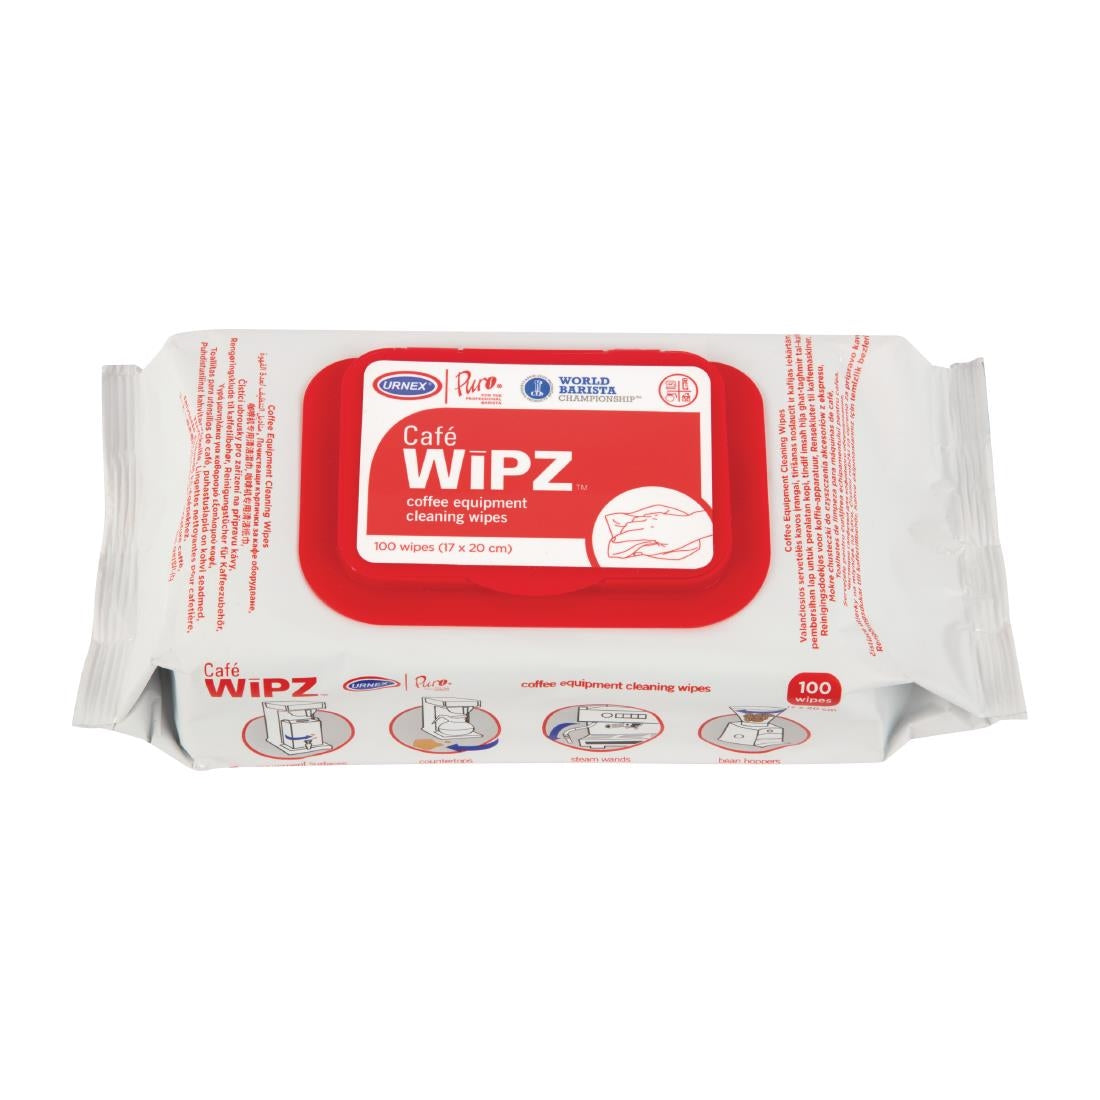 CX514 Urnex Café Wipz Coffee Equipment Cleaning Wipes (Pack of 100)